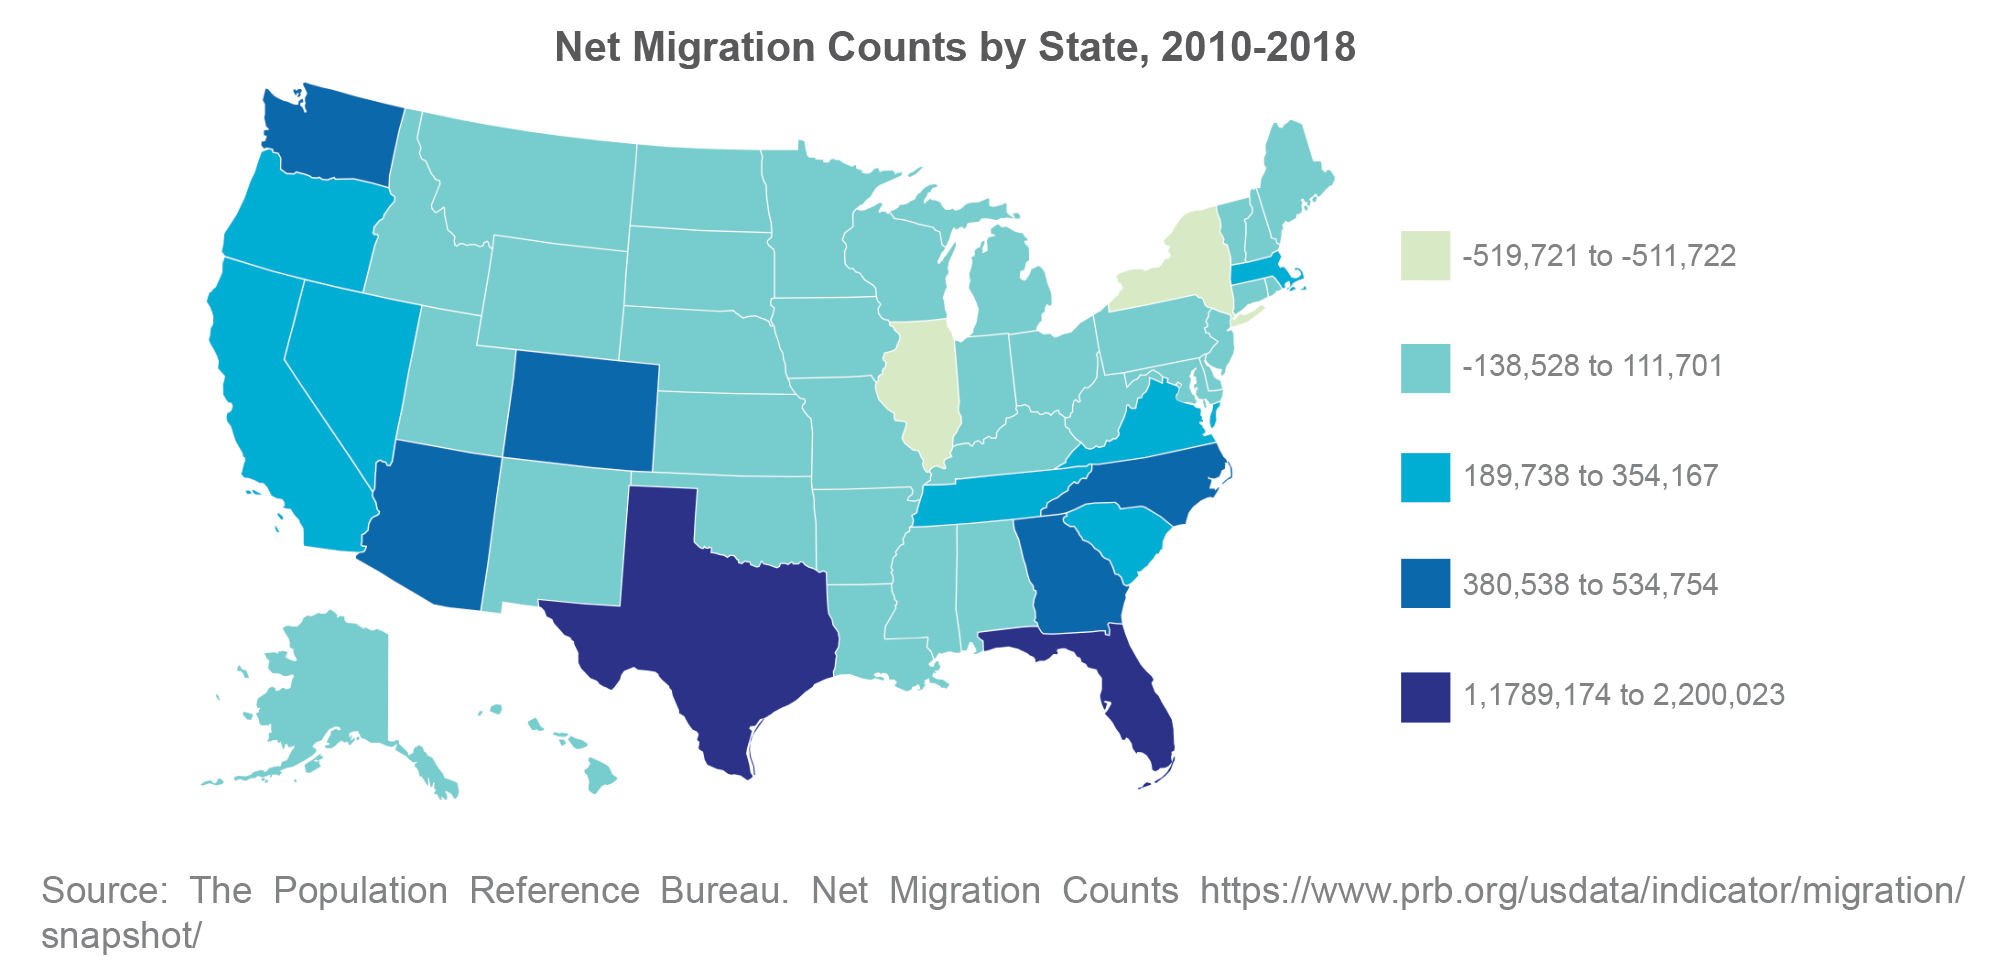 Net Migration Counts by State